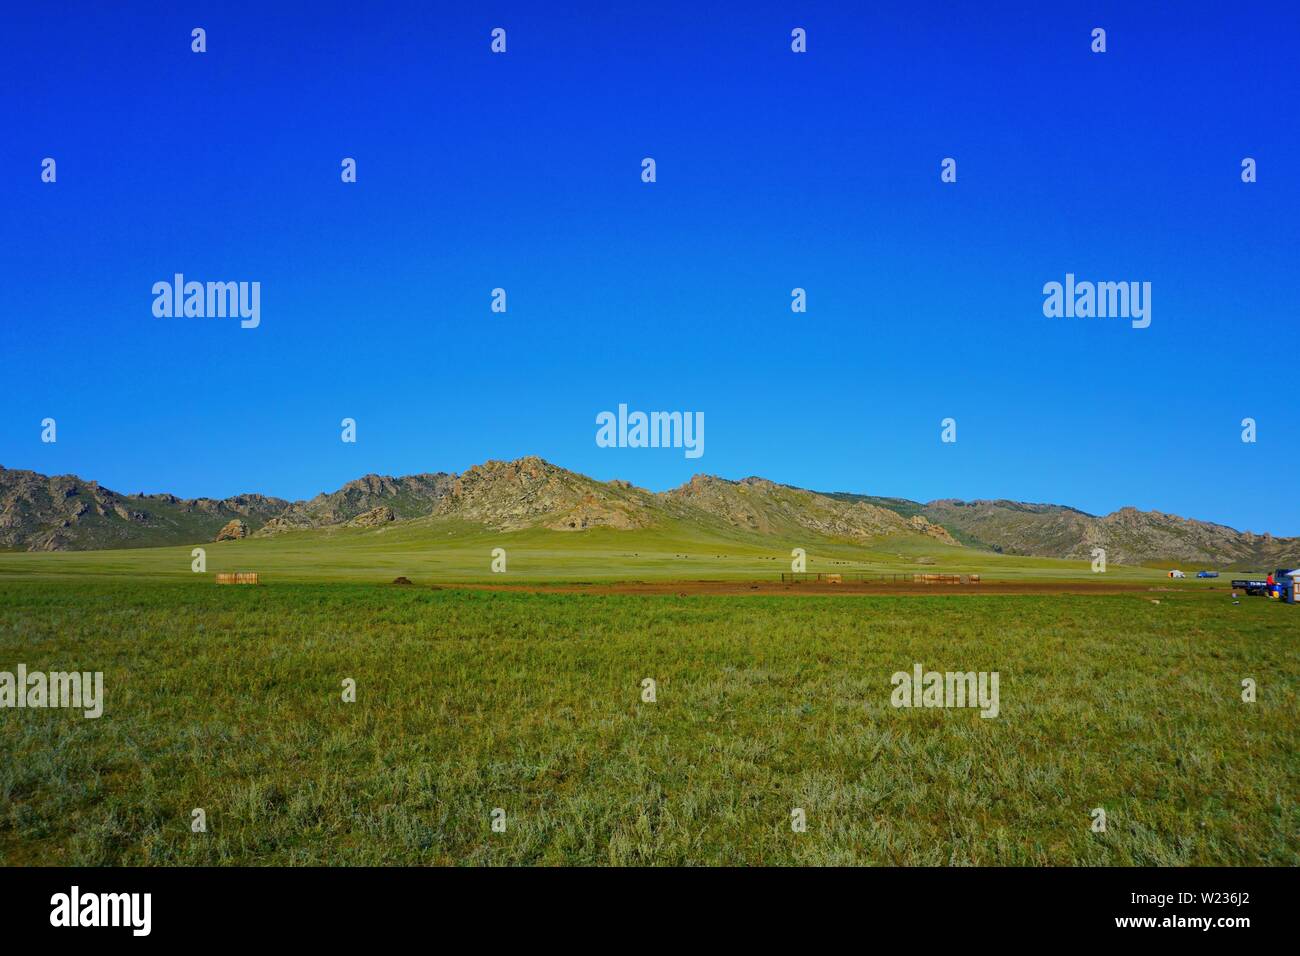 Blue sky infront of a mountain in rural Mongolia Stock Photo